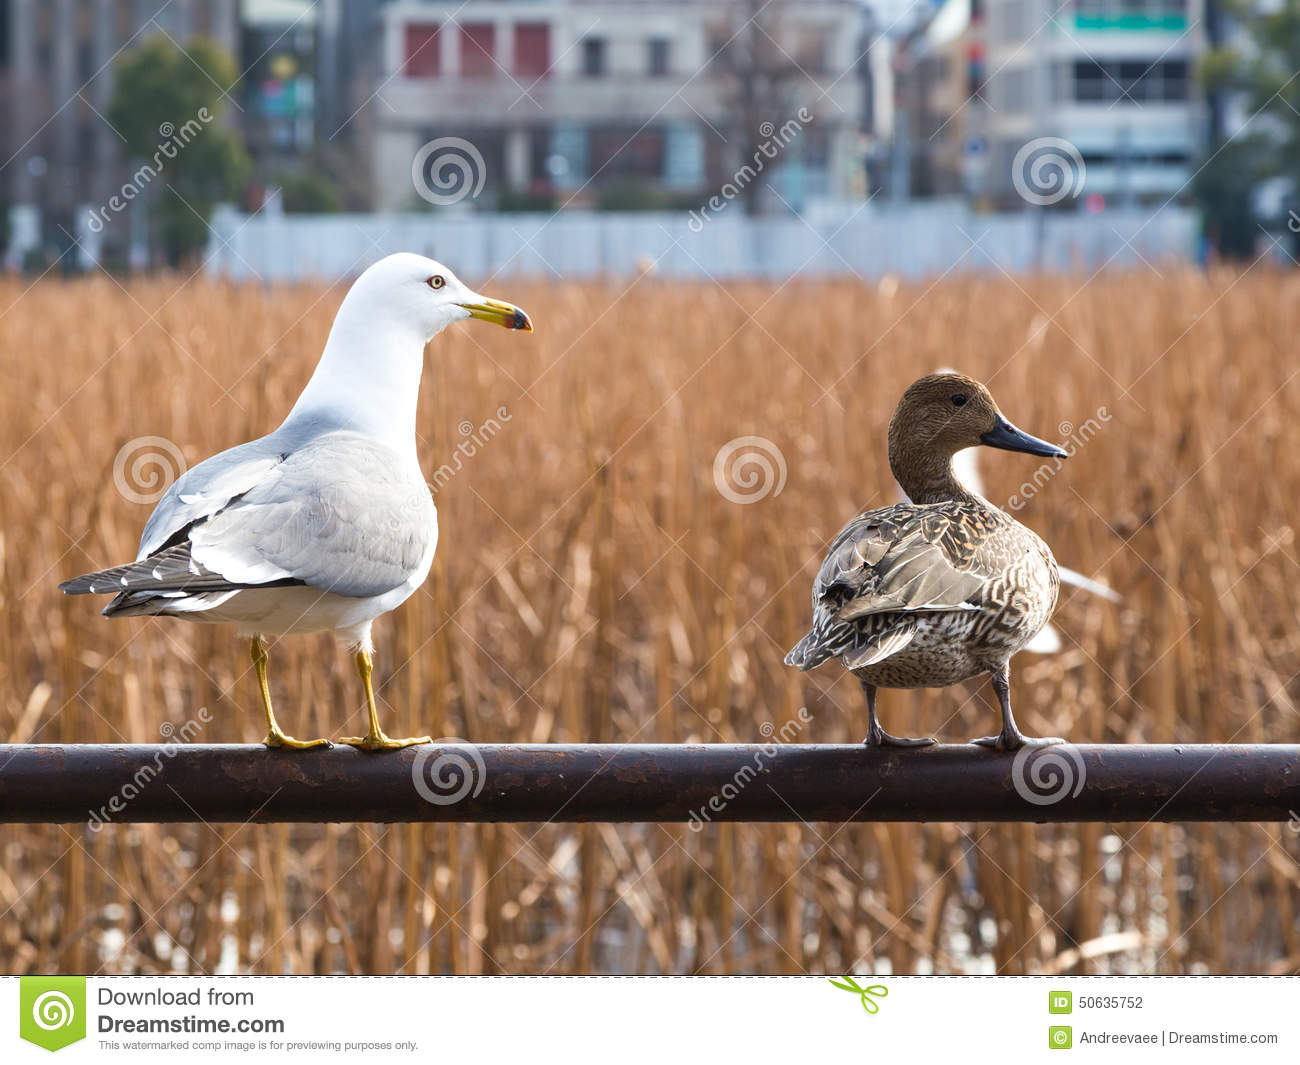 Is a seagull a bird or a duck?